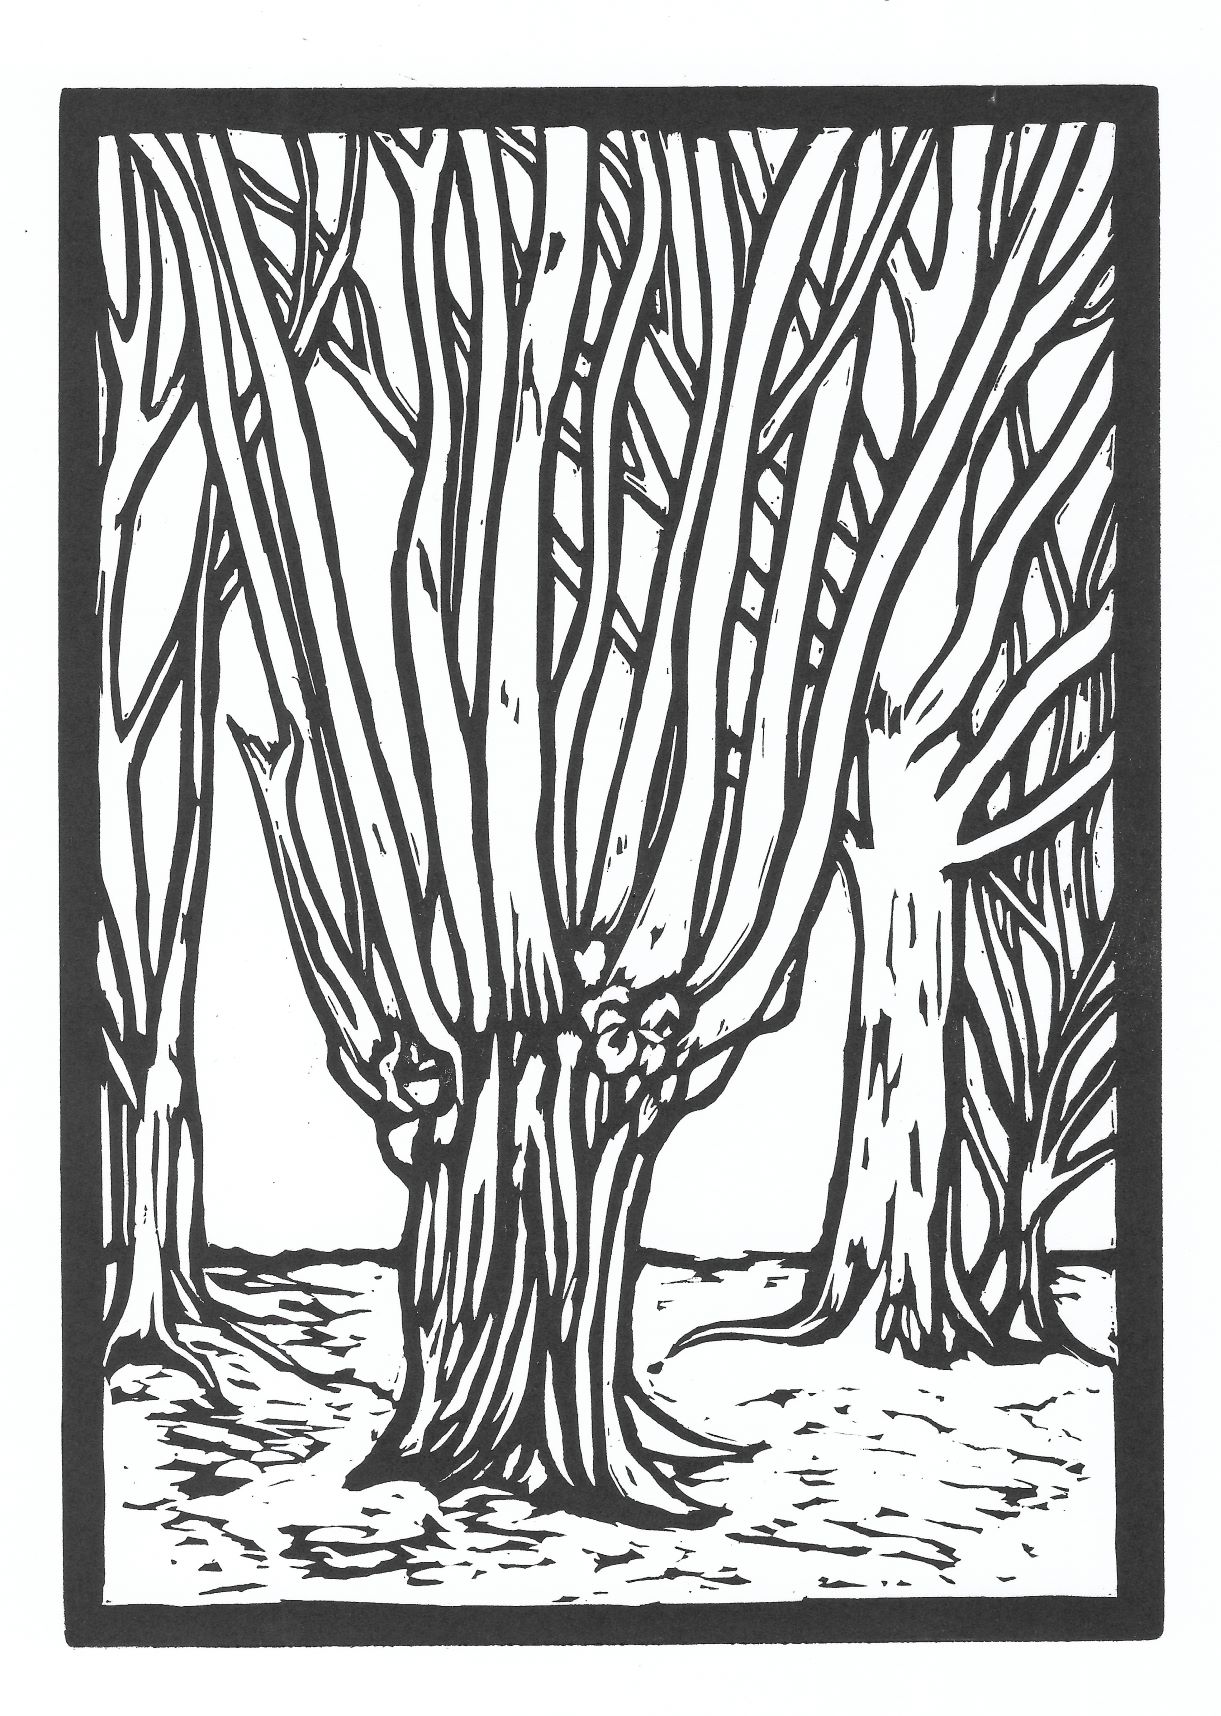 Black and white linocut of an ancient tree on Amesbury Banks, remnants of an iron age hill fort in Epping Forest.